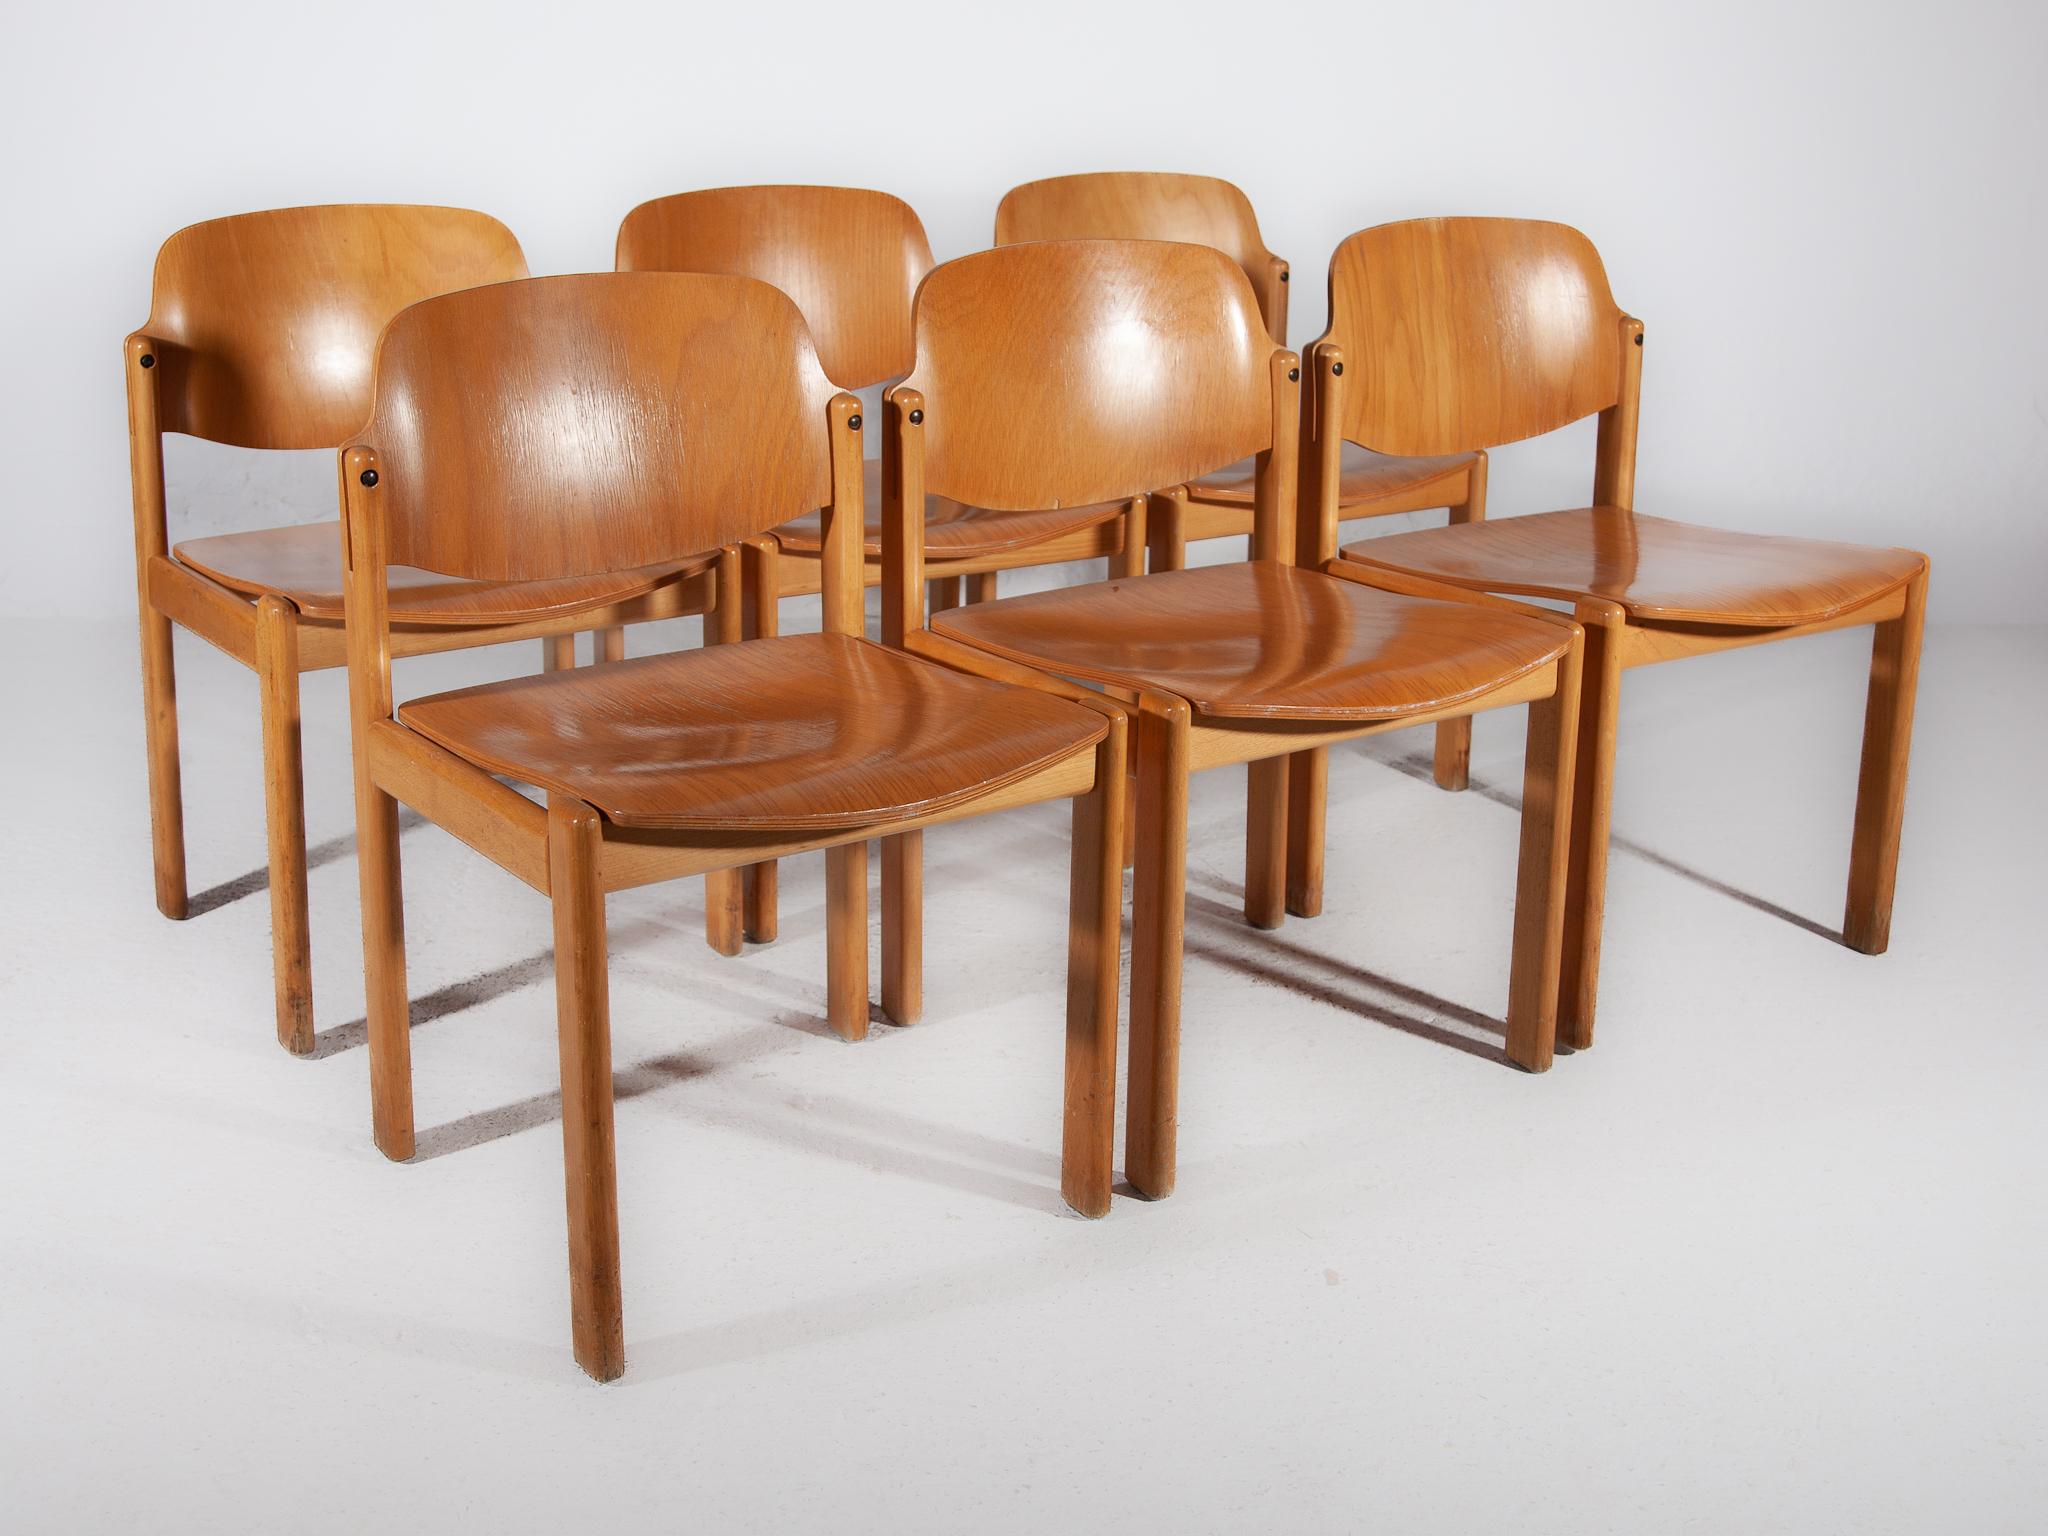 Set of Twelve Beech Wood Dining Chairs, Germany 1970s For Sale 7